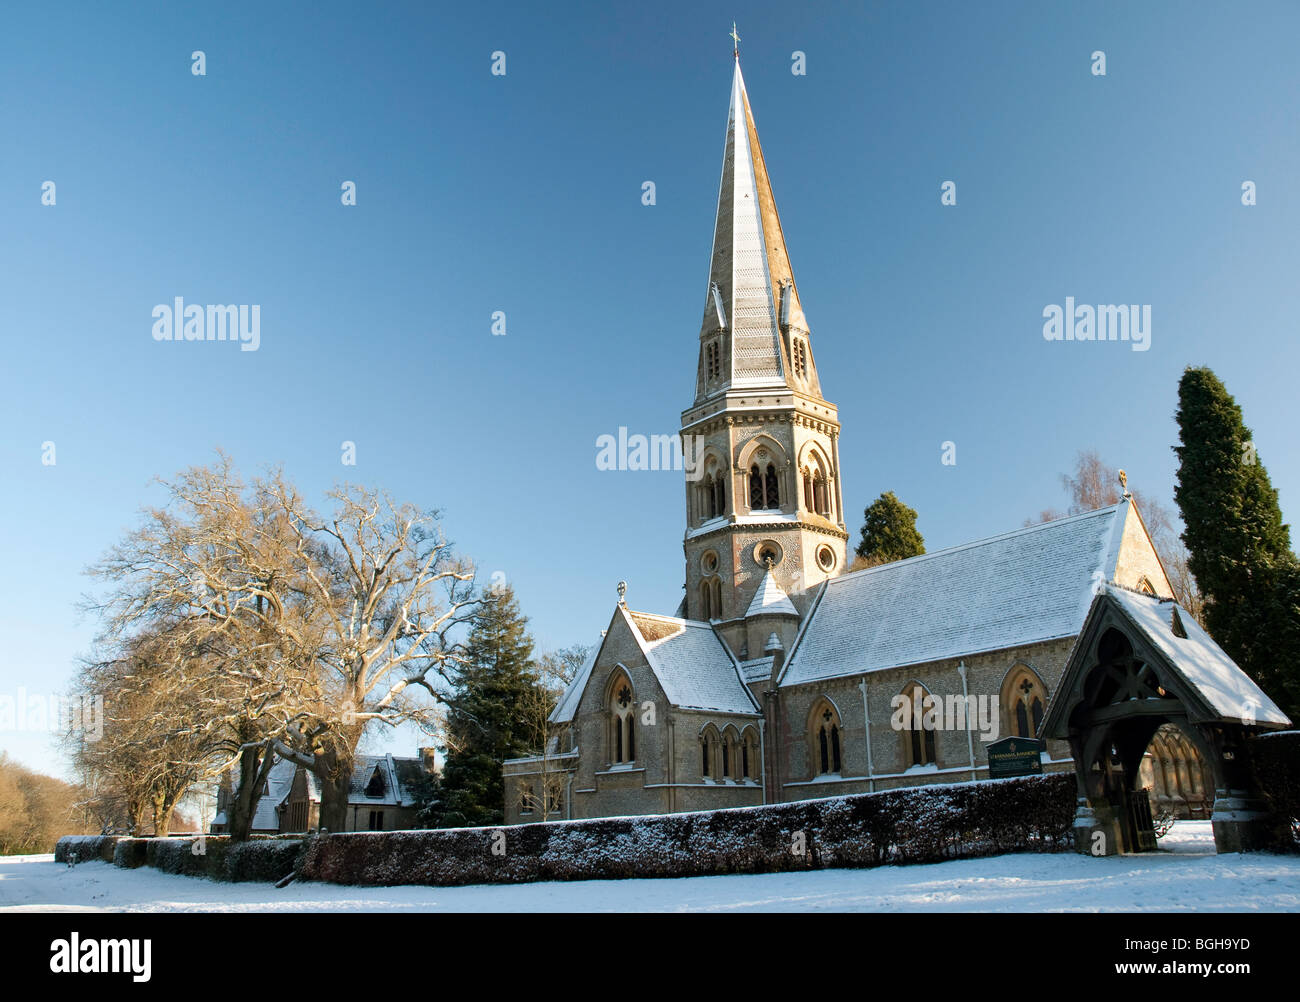 St Barnabas church (1859) on Ranmore Common Road in Dorking in the snow on a sunny Winter's day Stock Photo